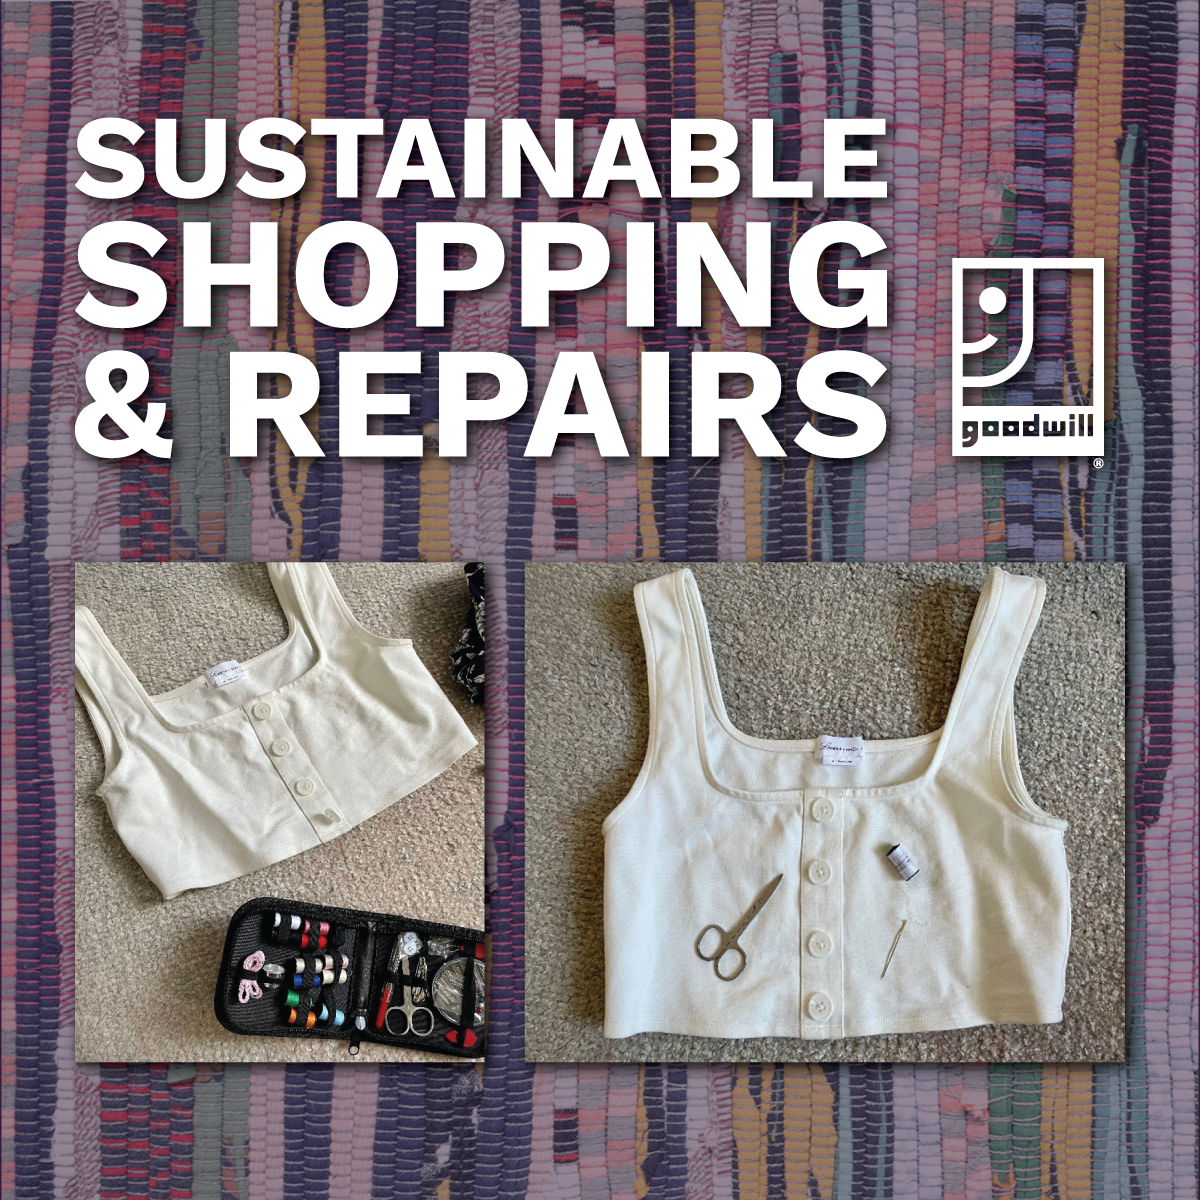 Why Sustainable Shopping Should Include Repairs